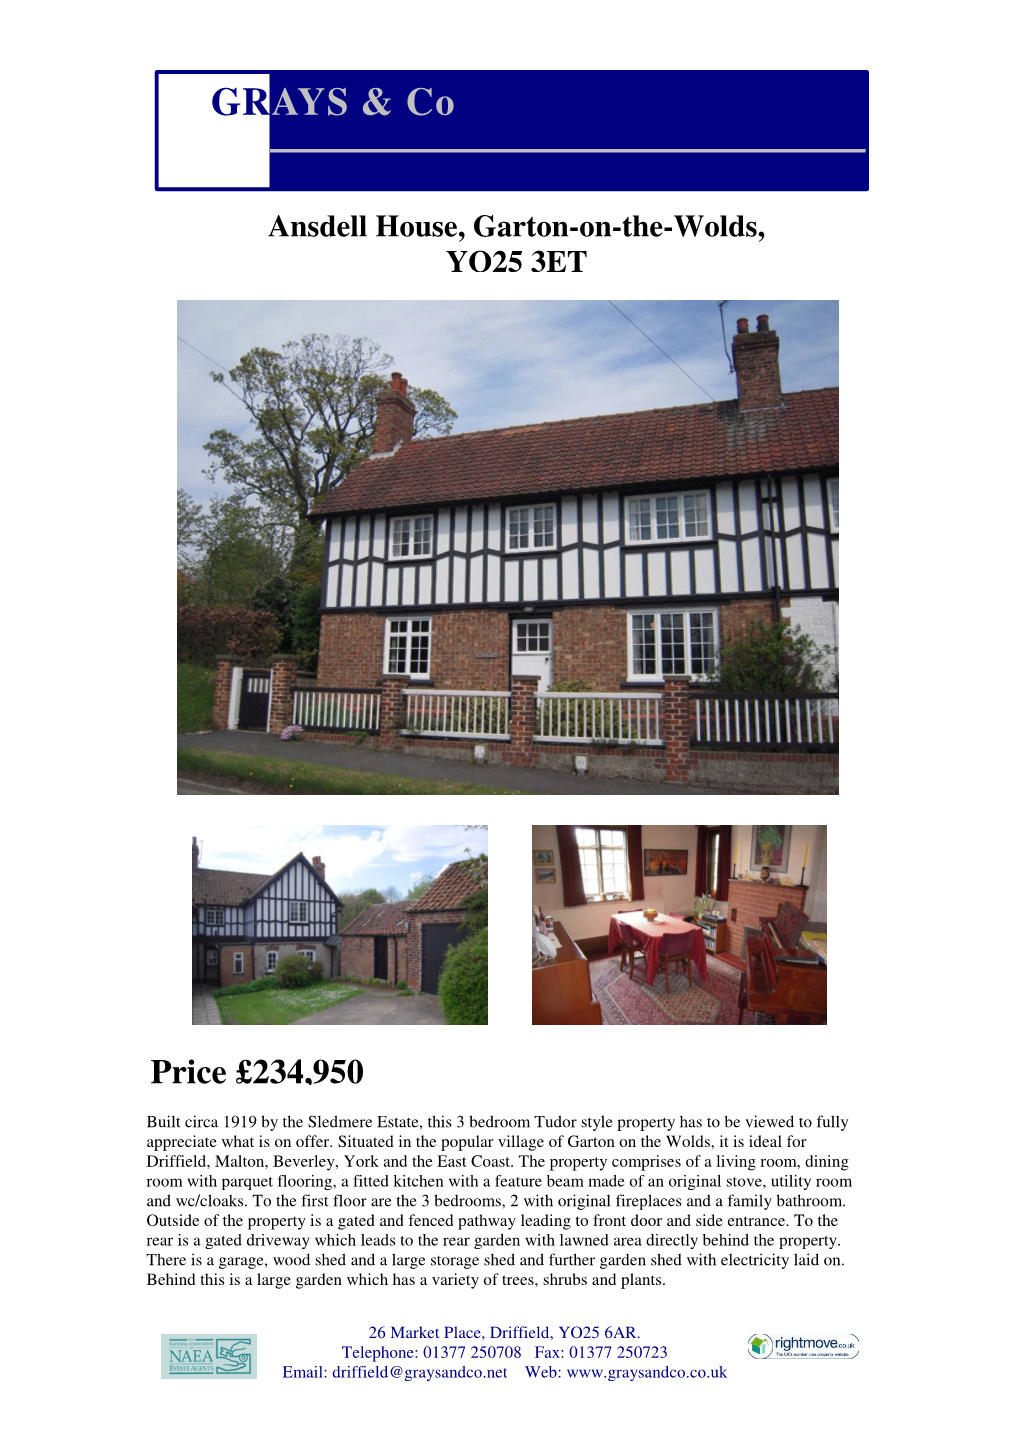 Ansdell House, Garton-On-The-Wolds, YO25